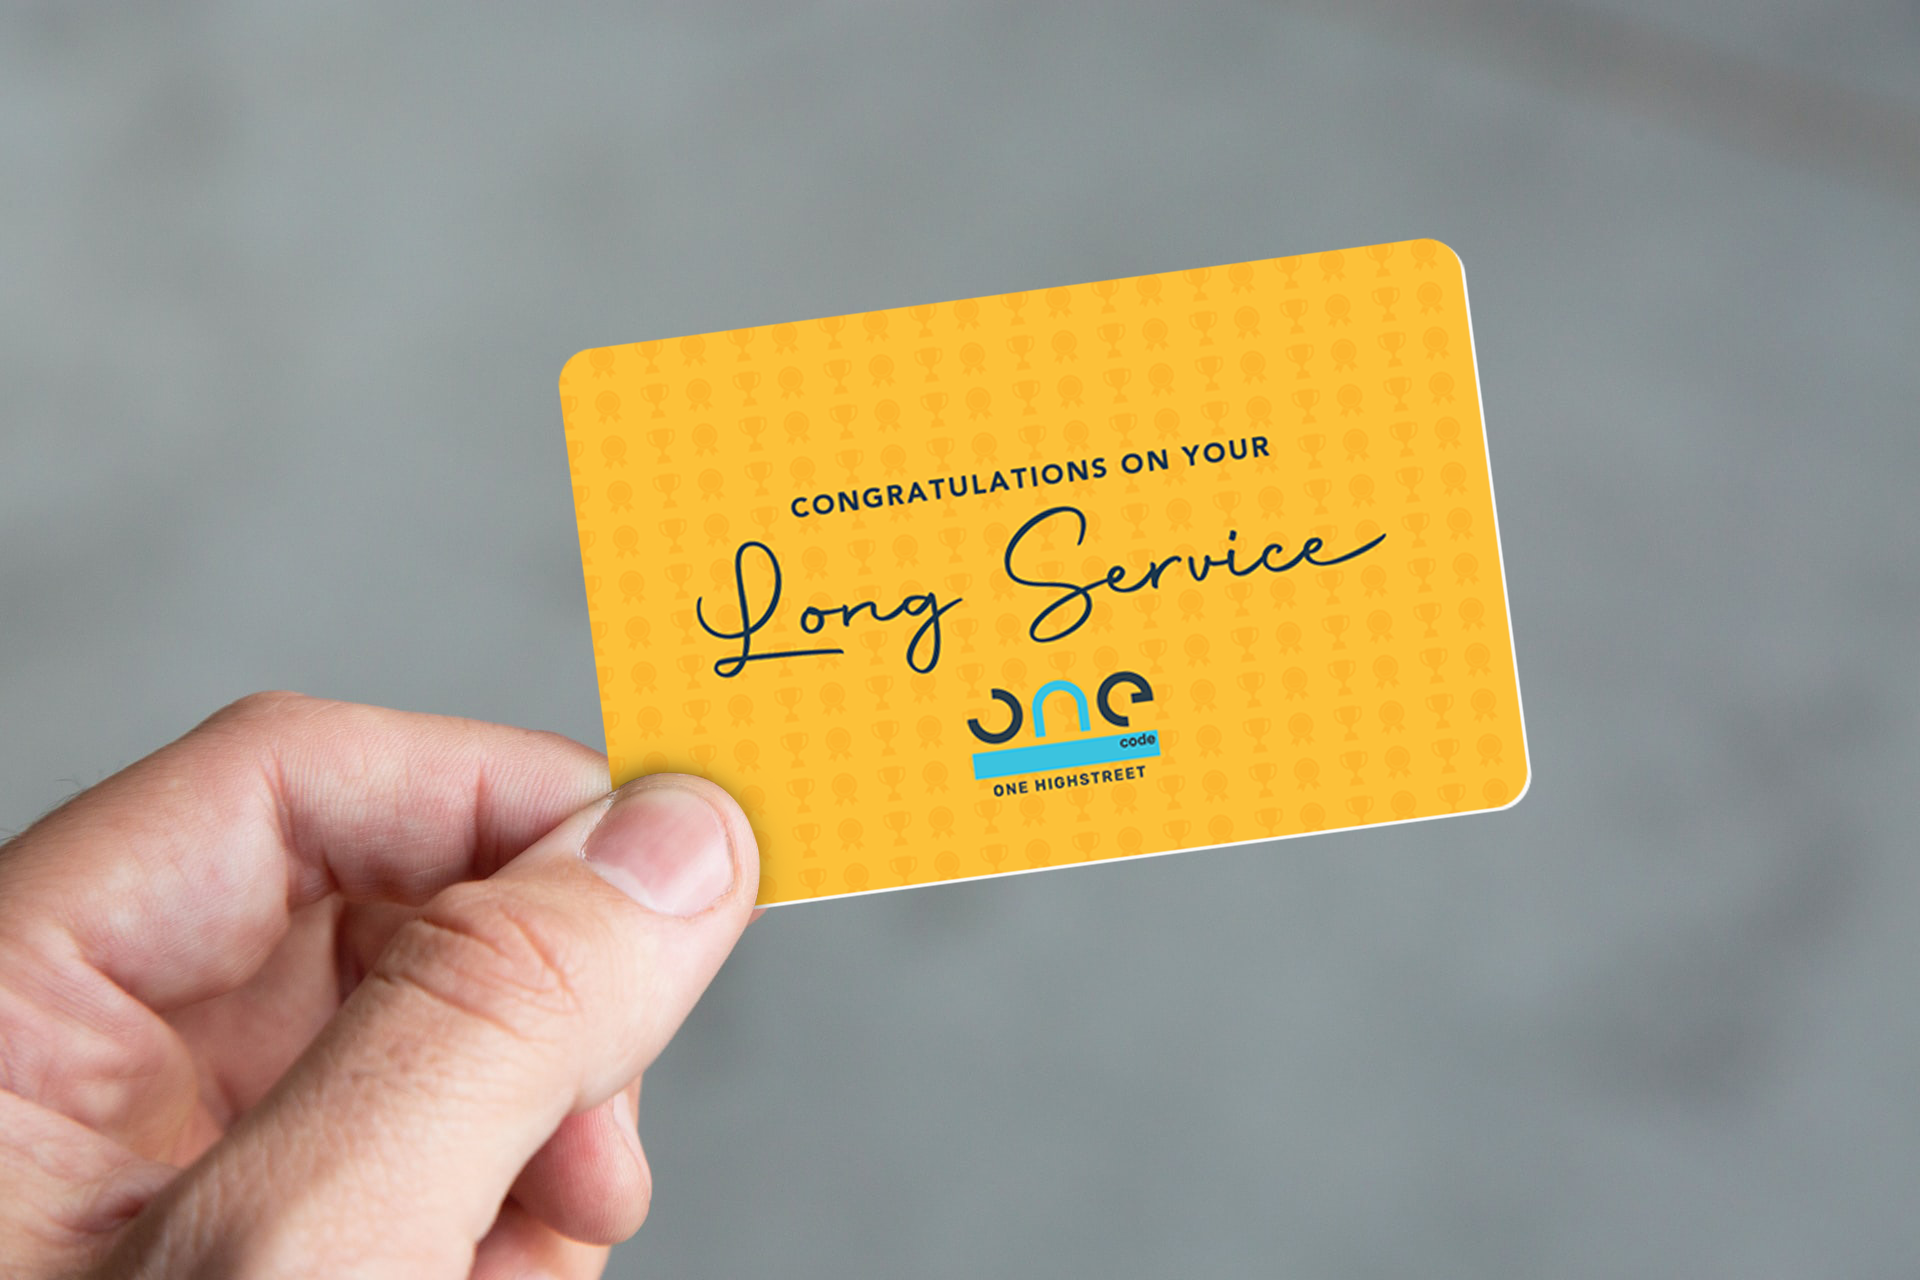 Long service award onecode gift card in someone's hand